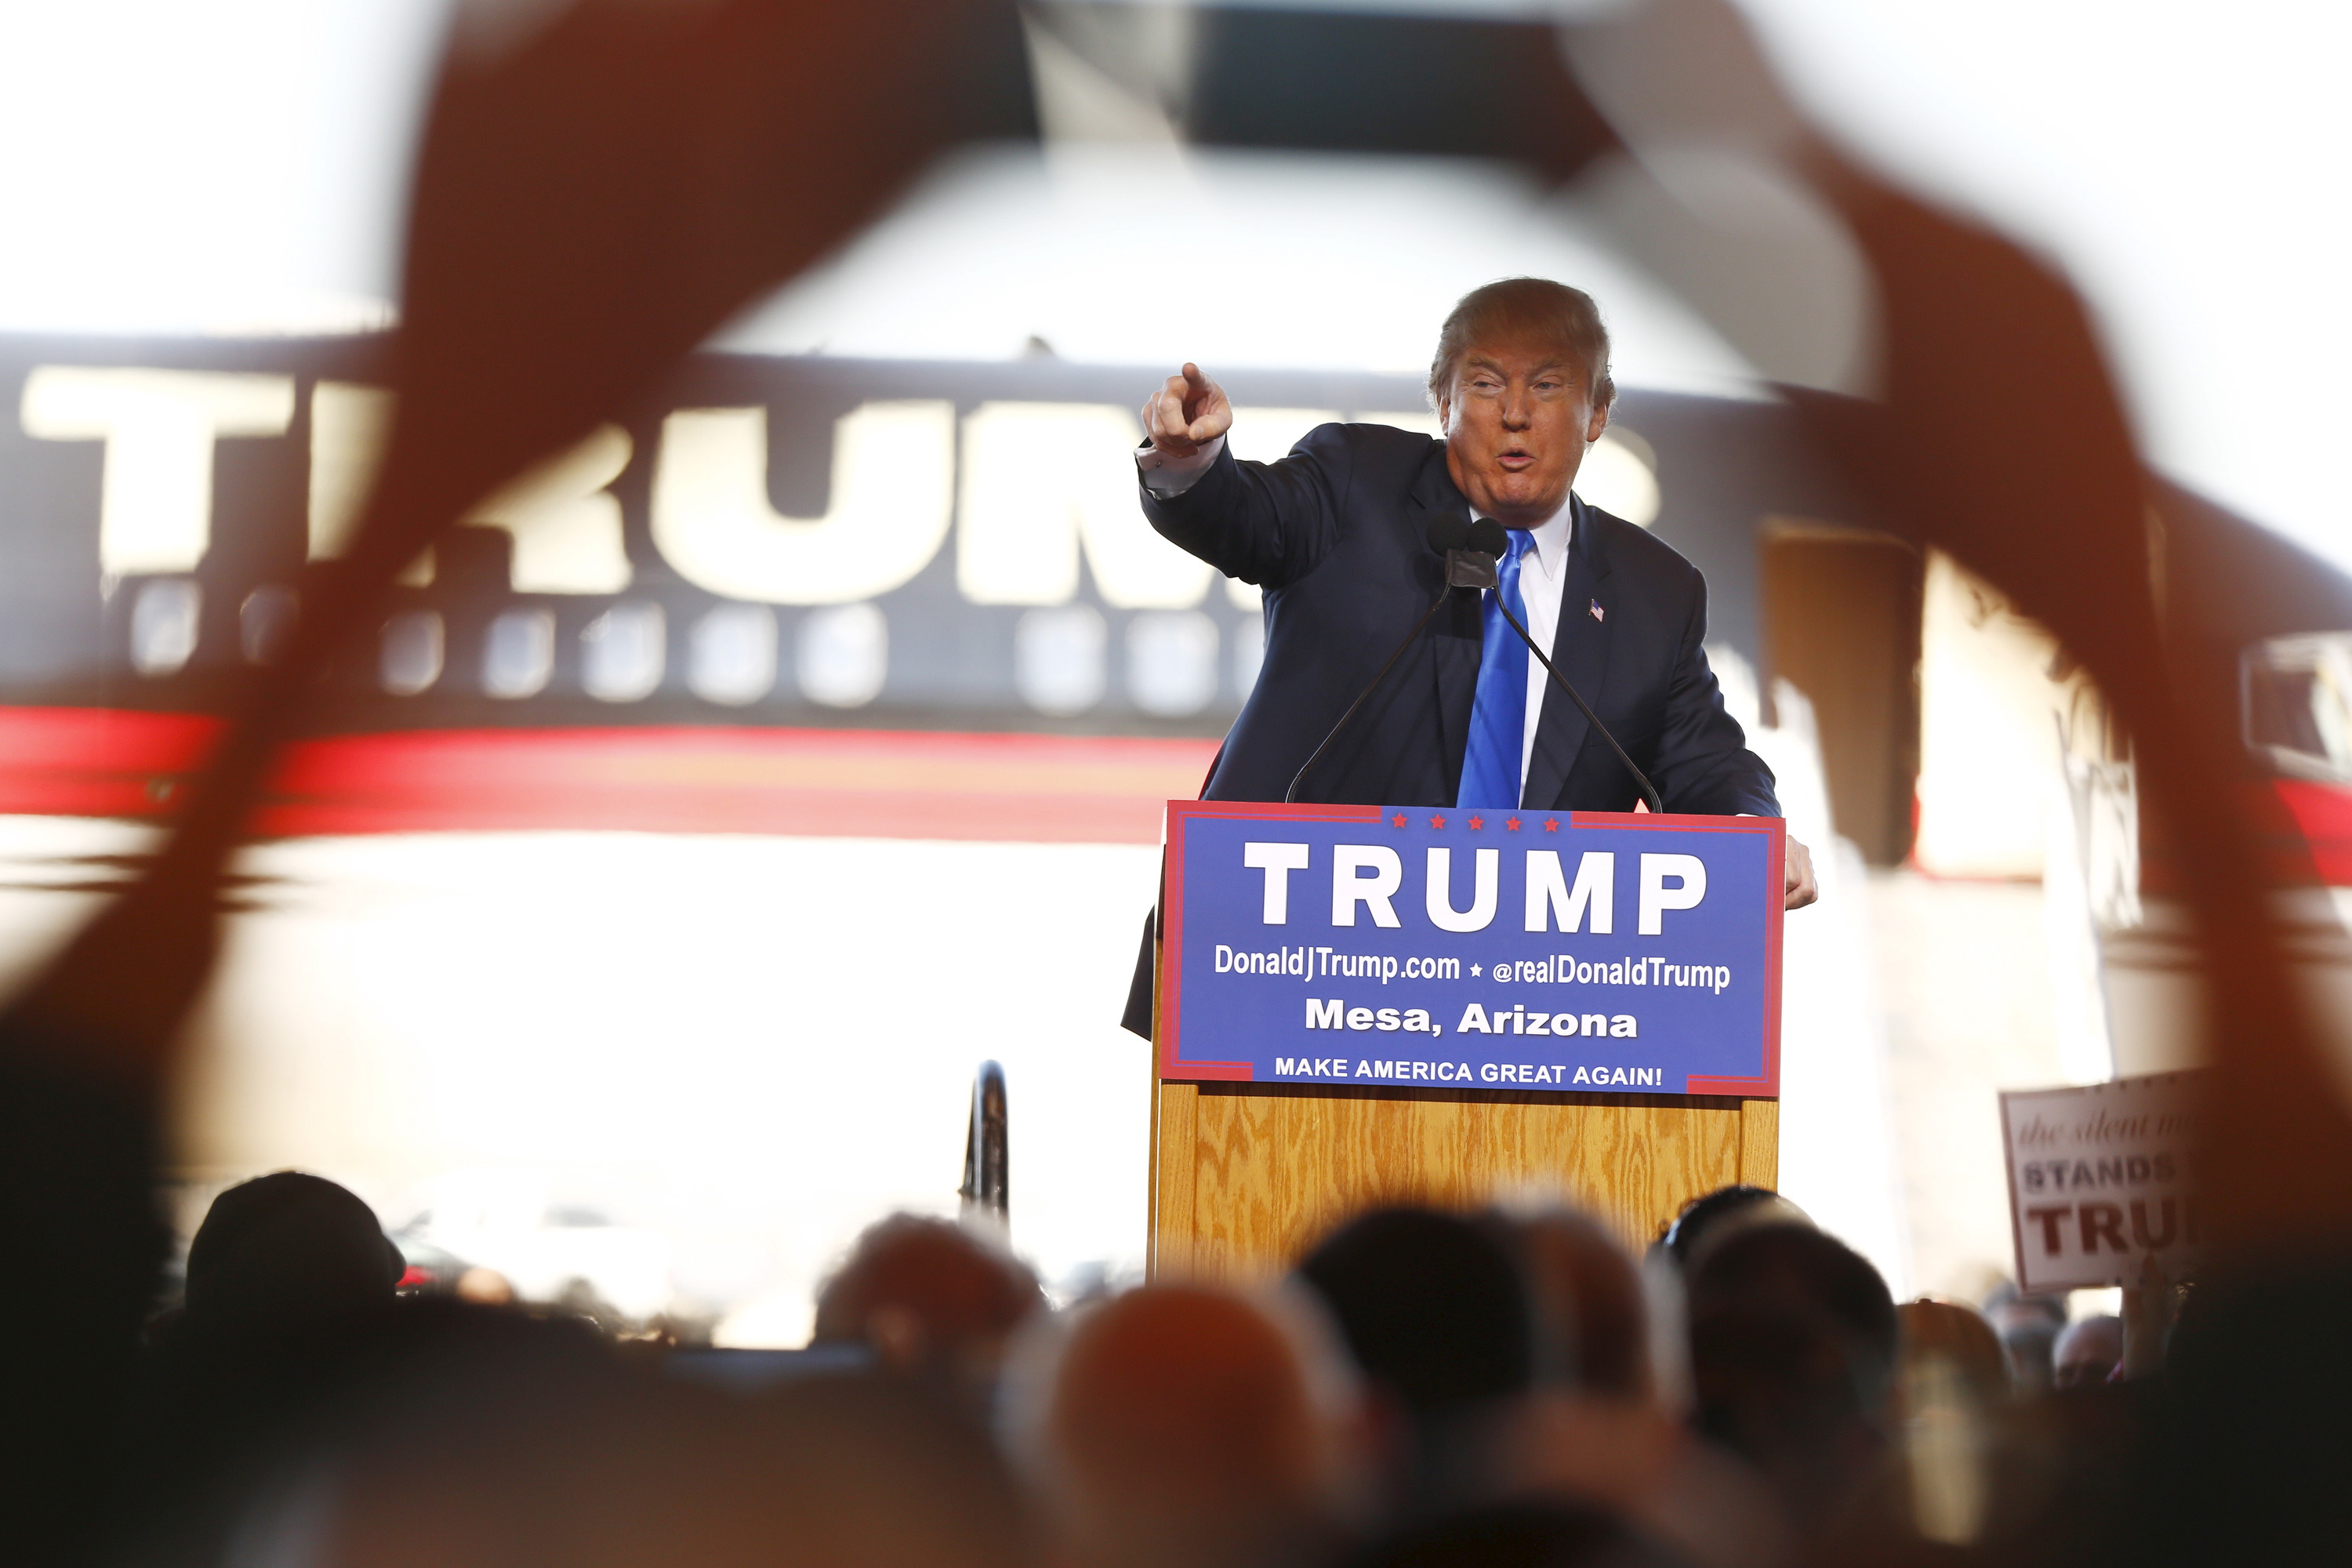 Not many pundits have accurately predicted the rise of Donald Trump.